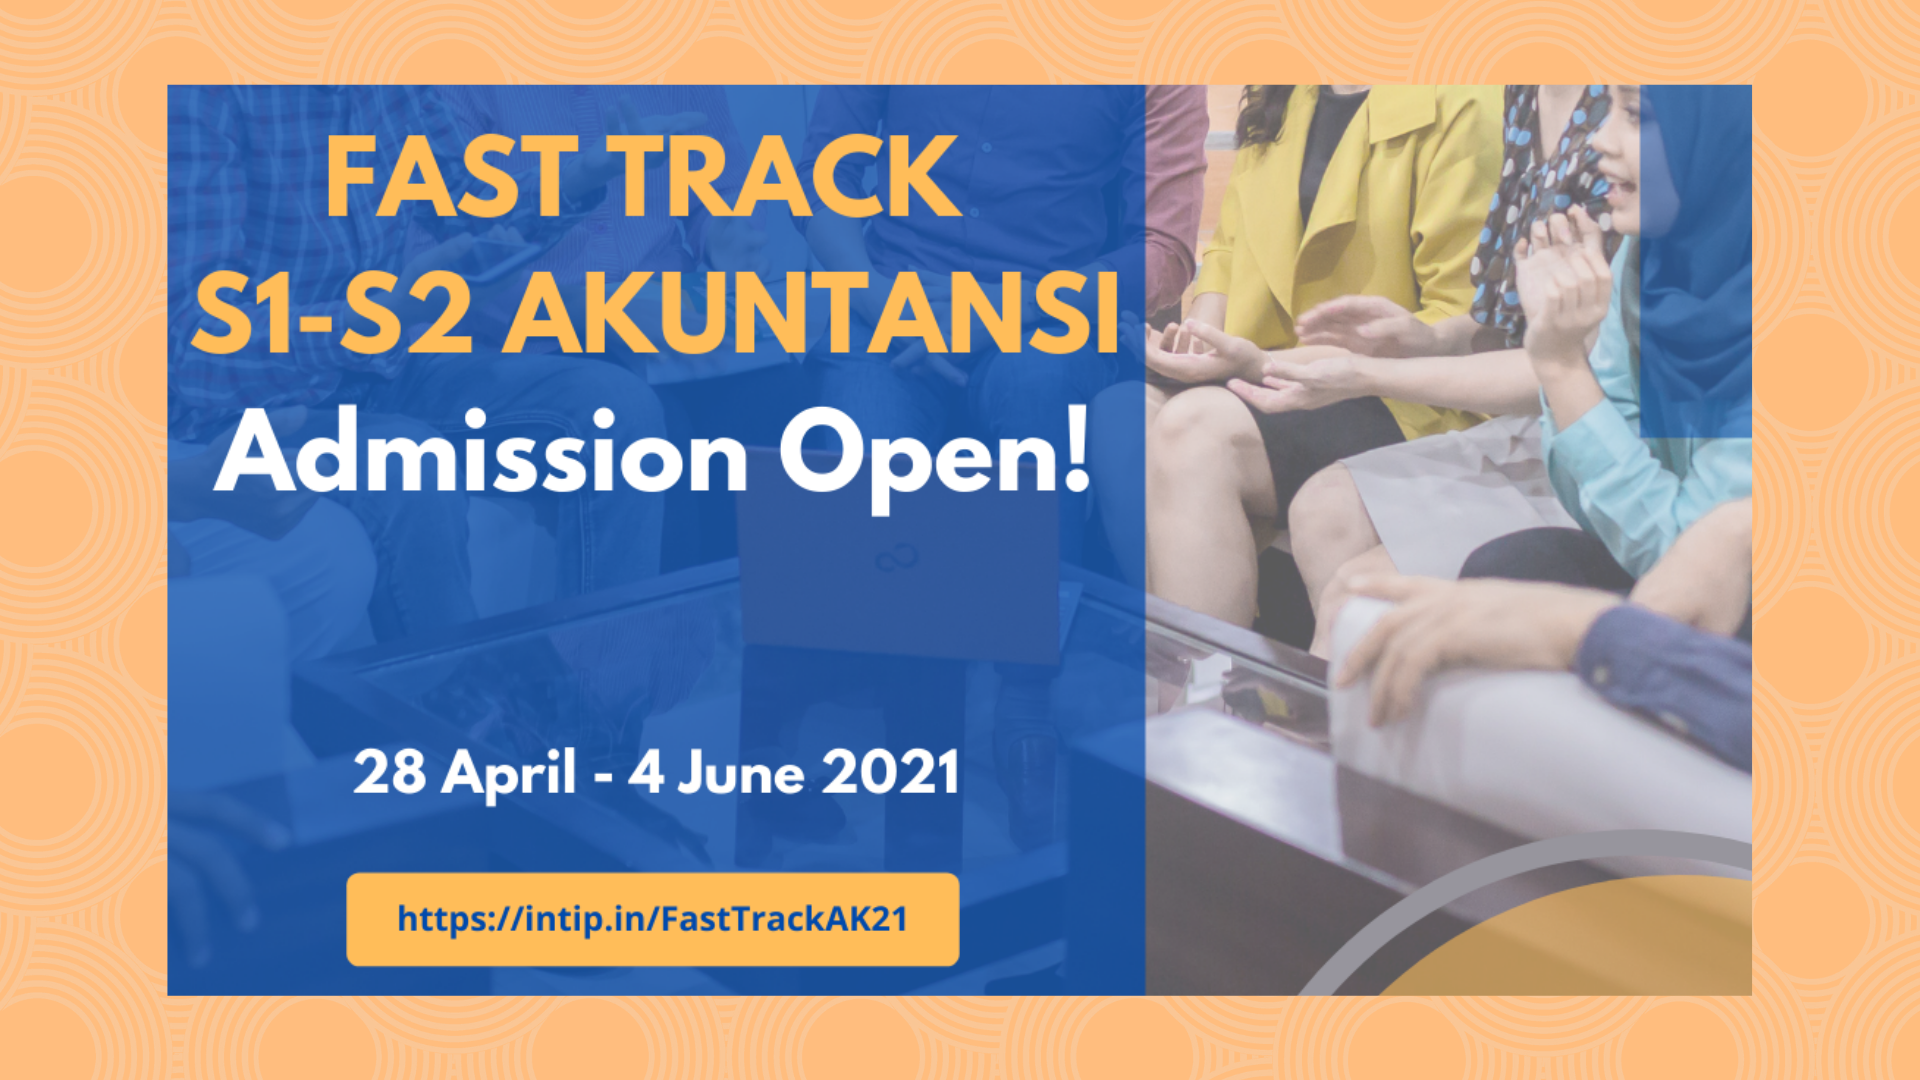 Fast Track S1-S2 Accounting: Admission Open!